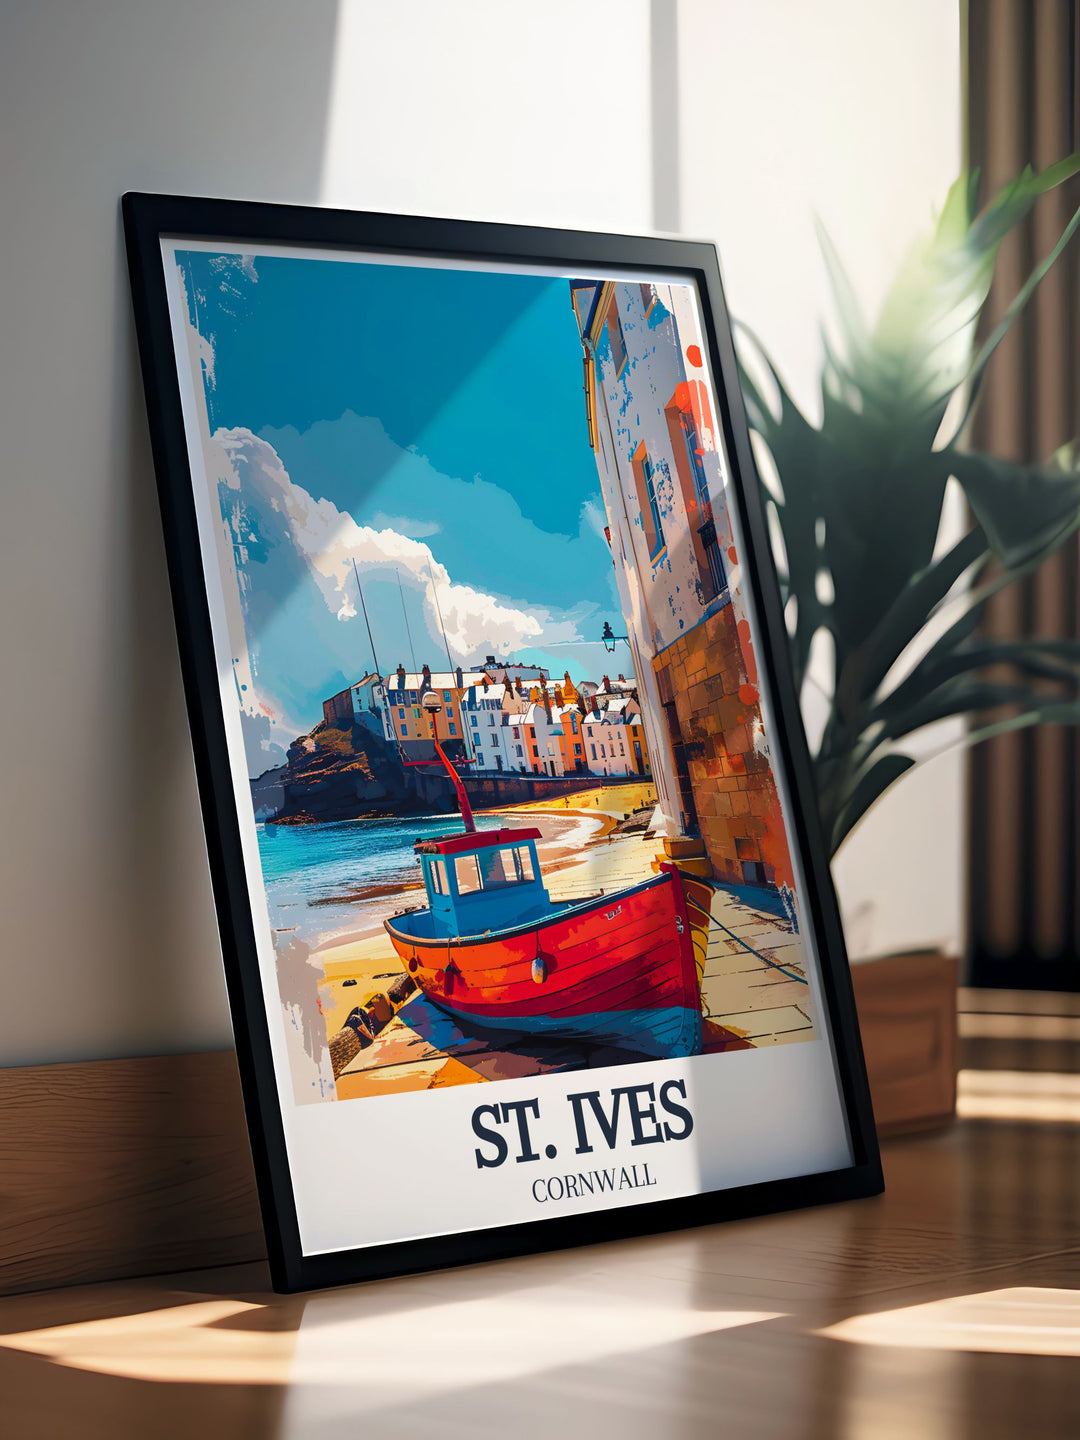 The picturesque landscapes of Porthmeor Beach and the vibrant community of St. Ives are beautifully illustrated in this poster, inviting viewers to discover Cornwalls treasures.